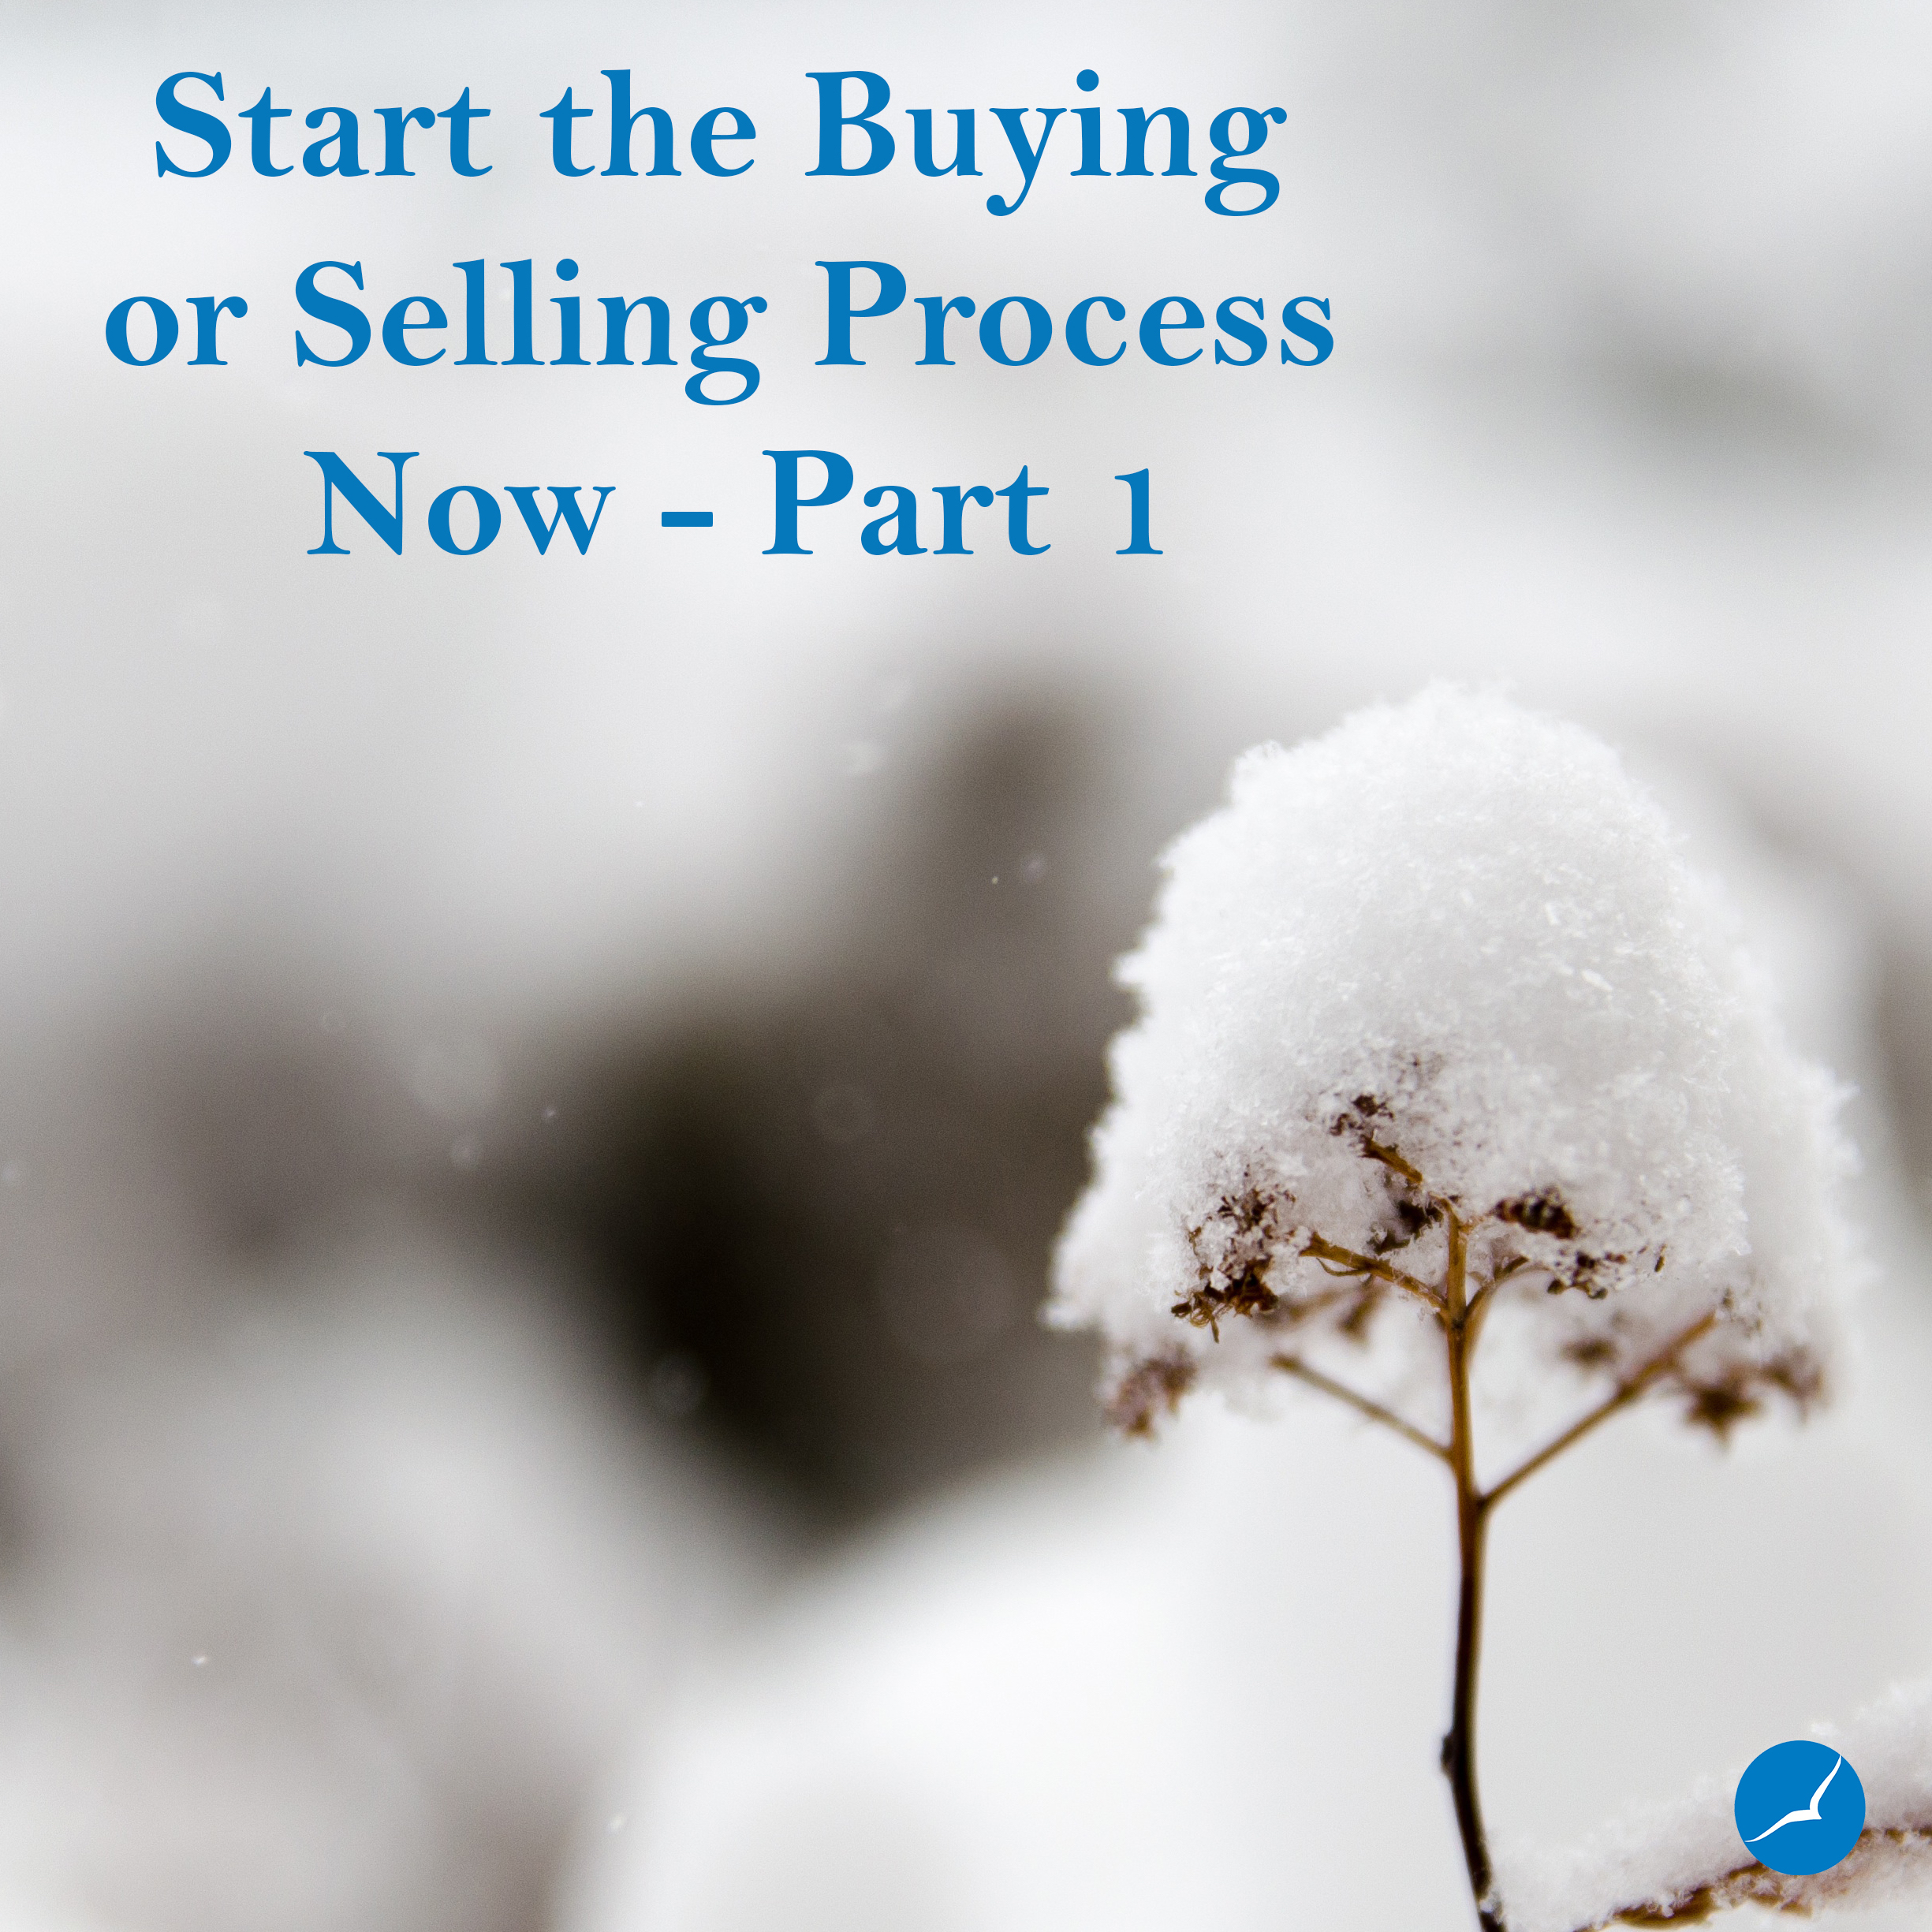 Start the Buying or Selling Process Now - Part 1